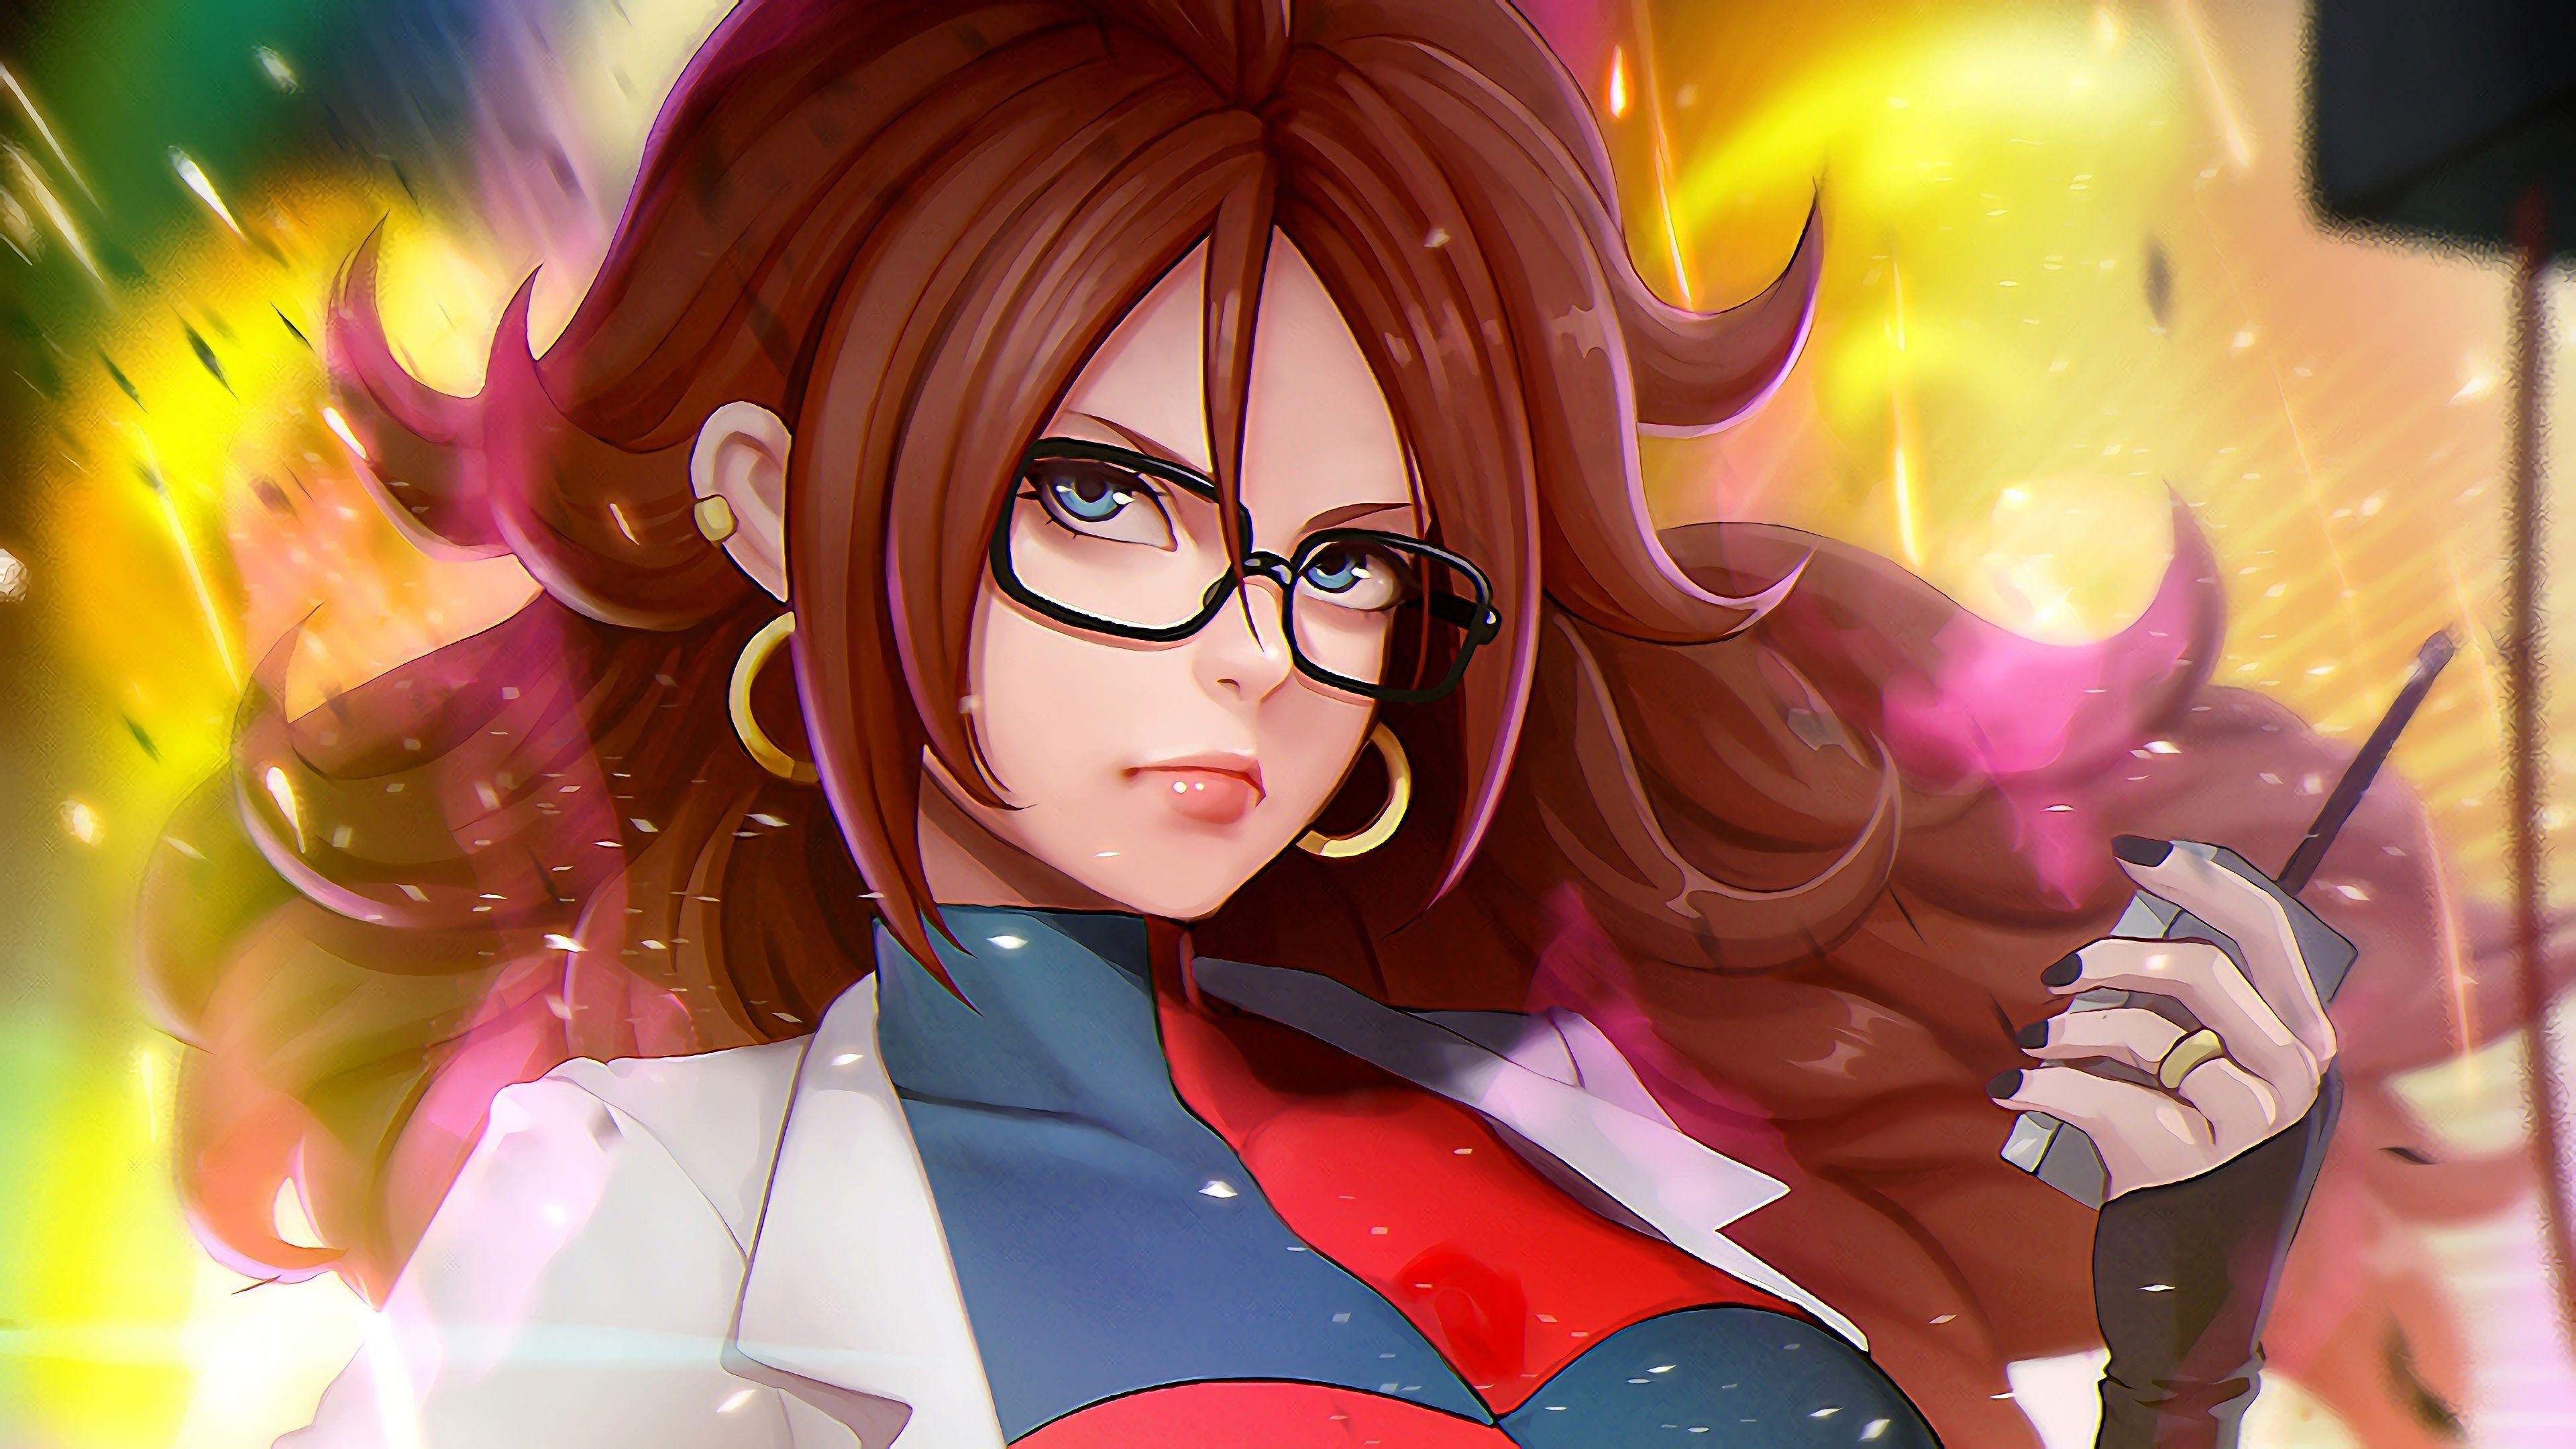 Android 21 Wallpapers Top Free Android 21 Backgrounds Wallpaperaccess